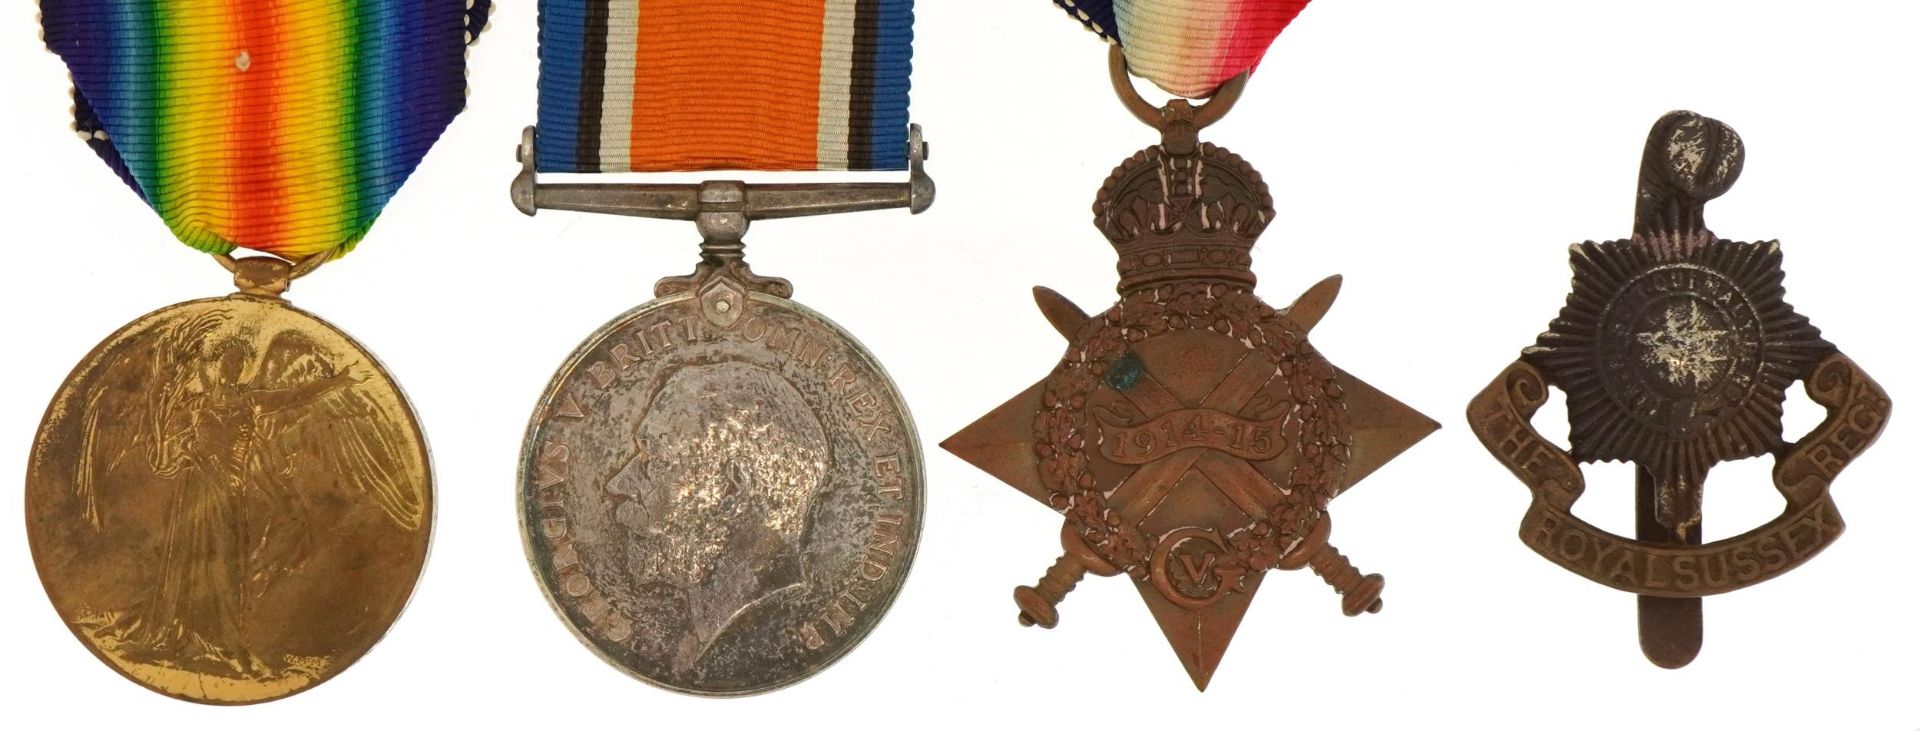 British military World War I trio and Royal Sussex Regiment cap badge, the trio awarded to 5423PTE.